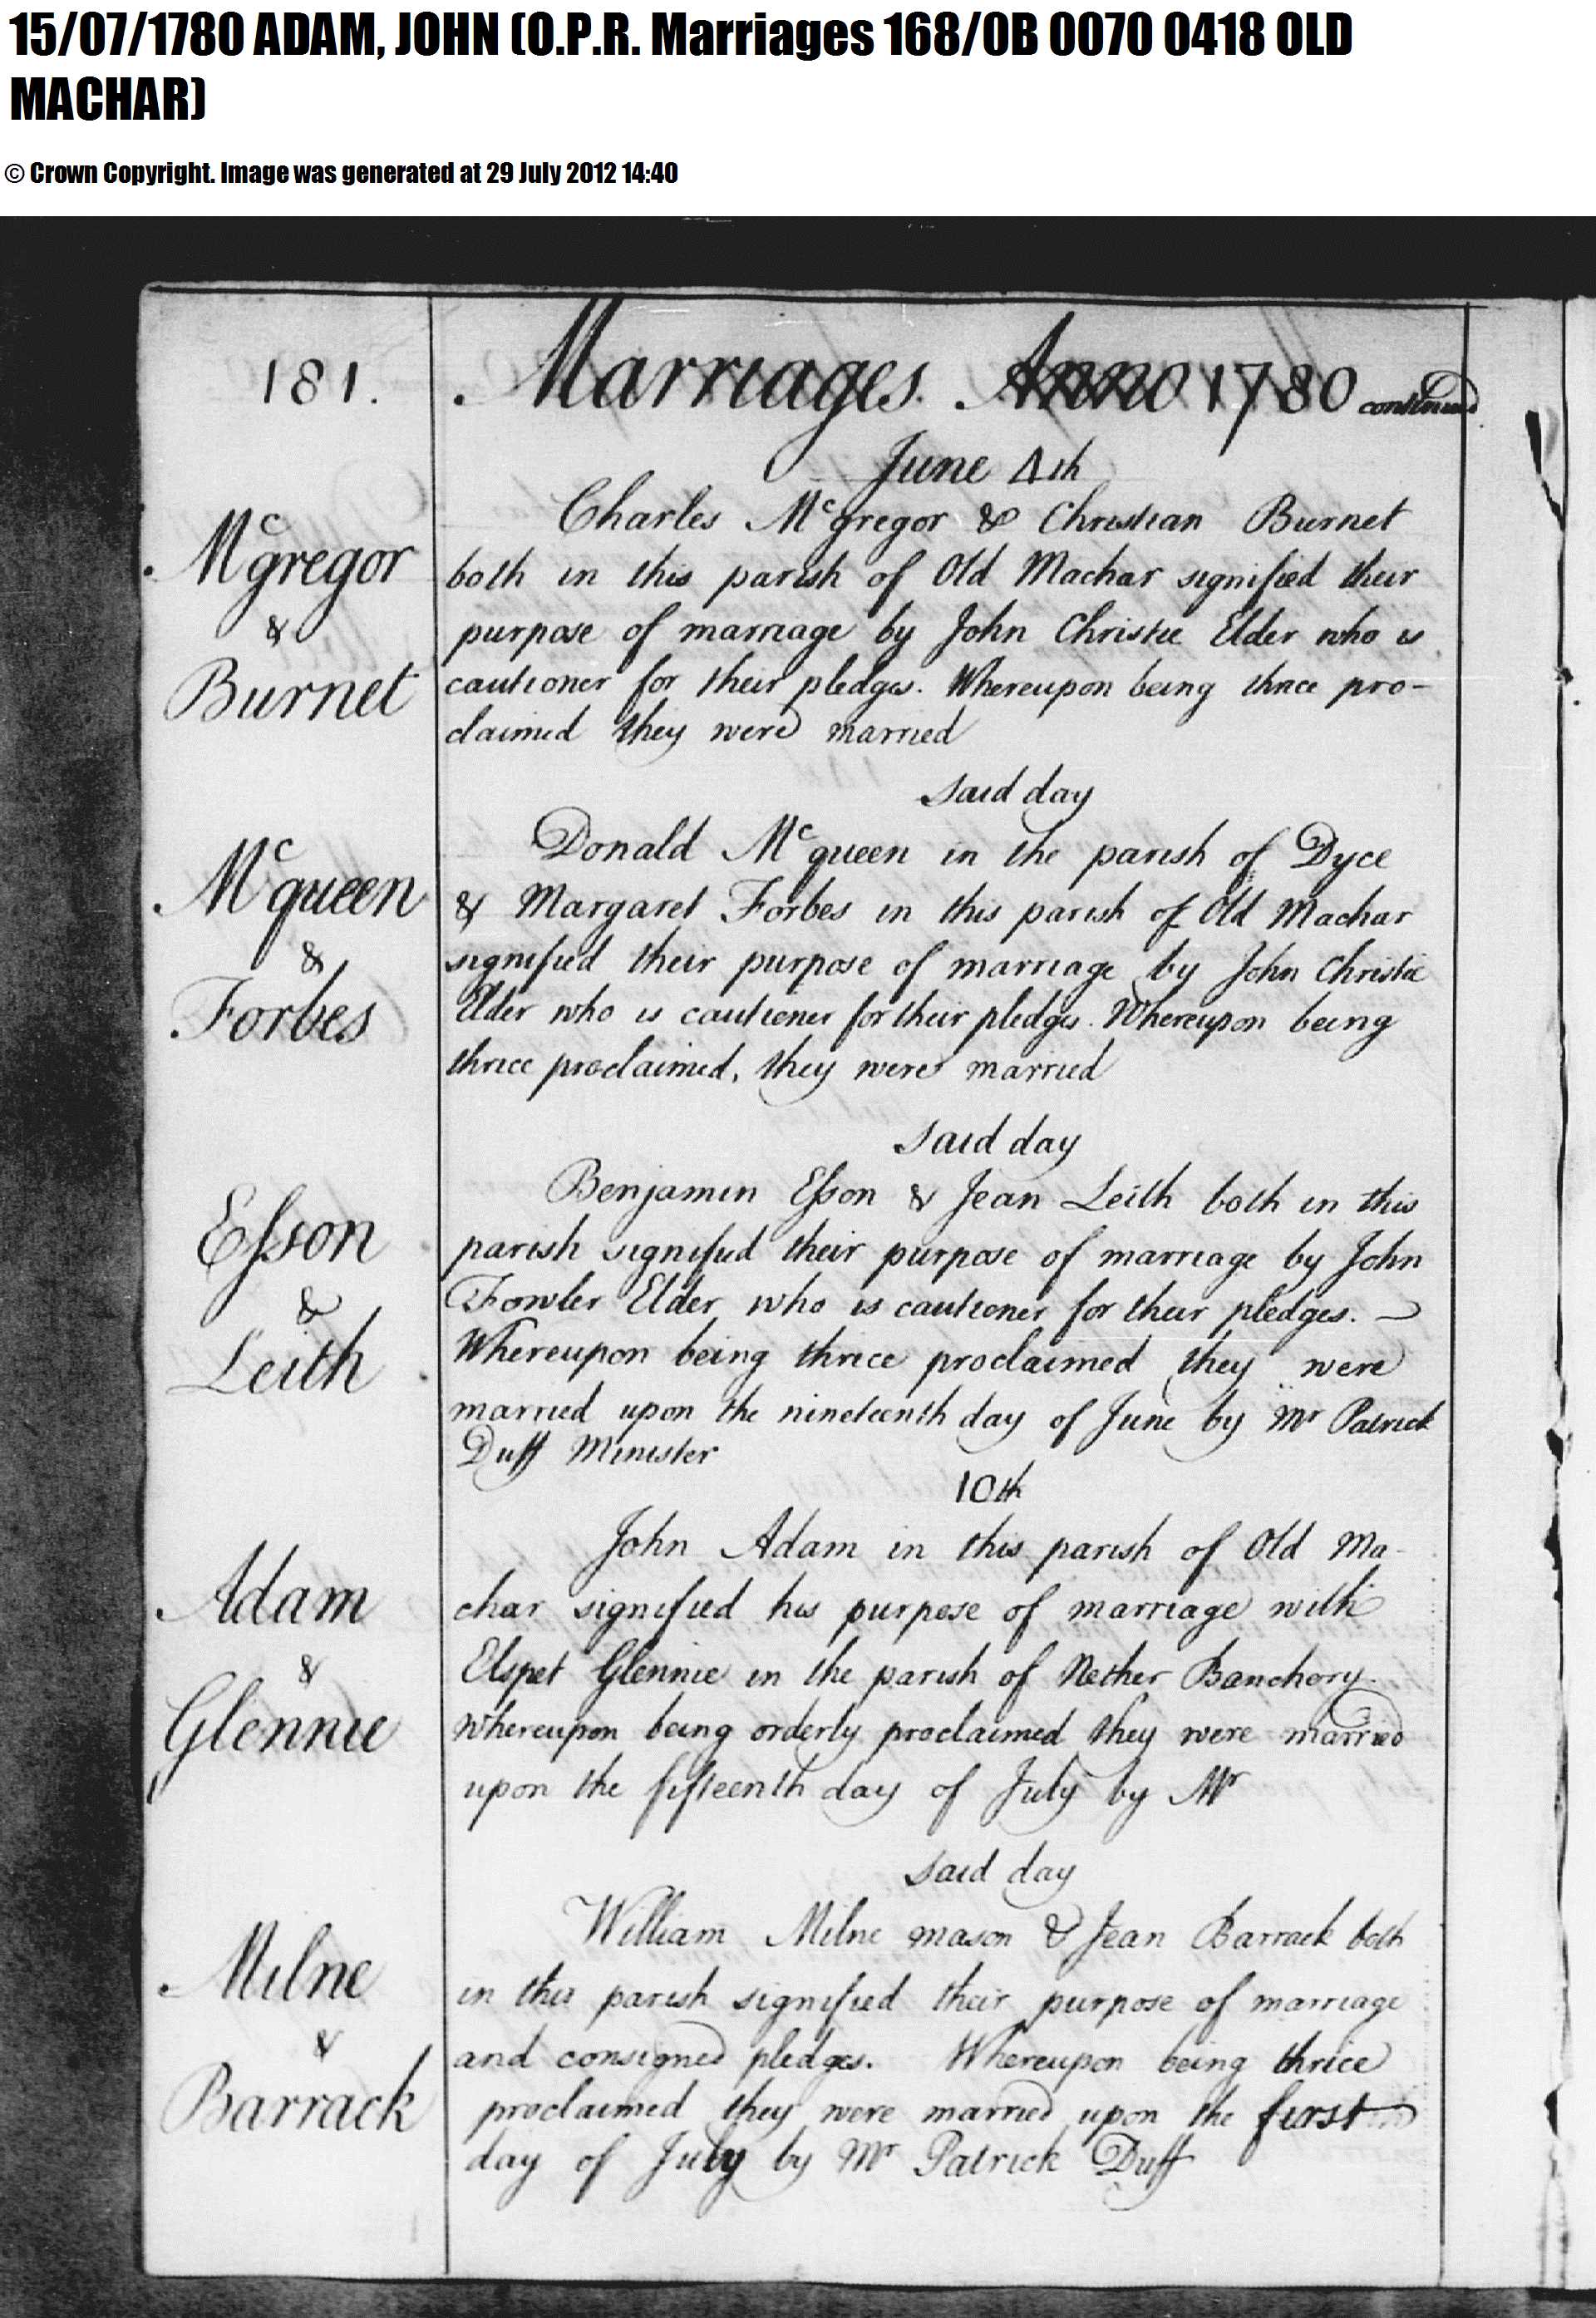 Marriage certificate, July 15, 1780